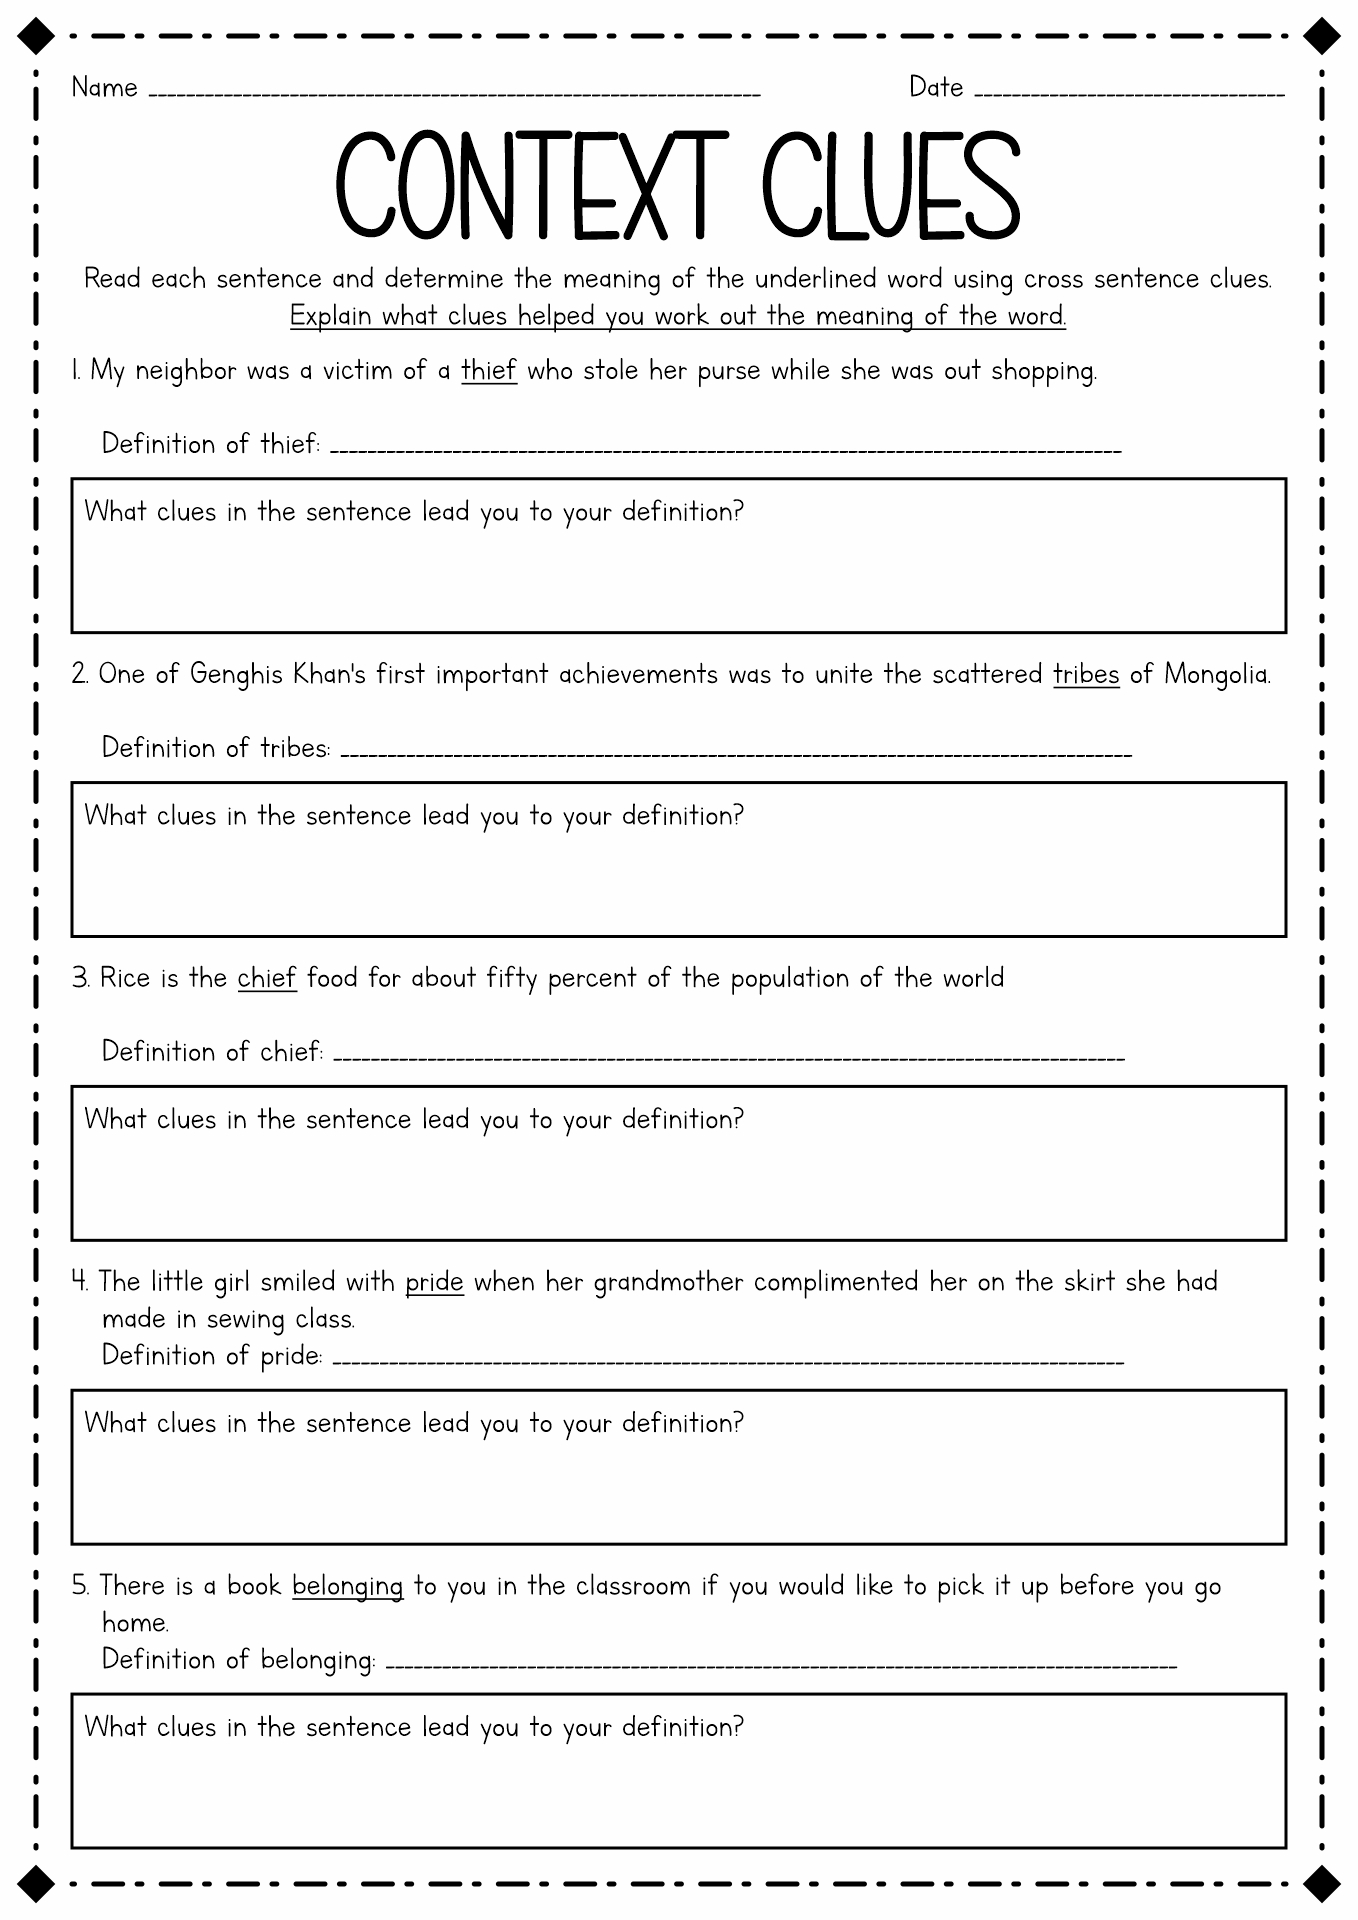 17-best-images-of-free-communication-worksheets-2nd-grade-vocabulary-worksheets-teen